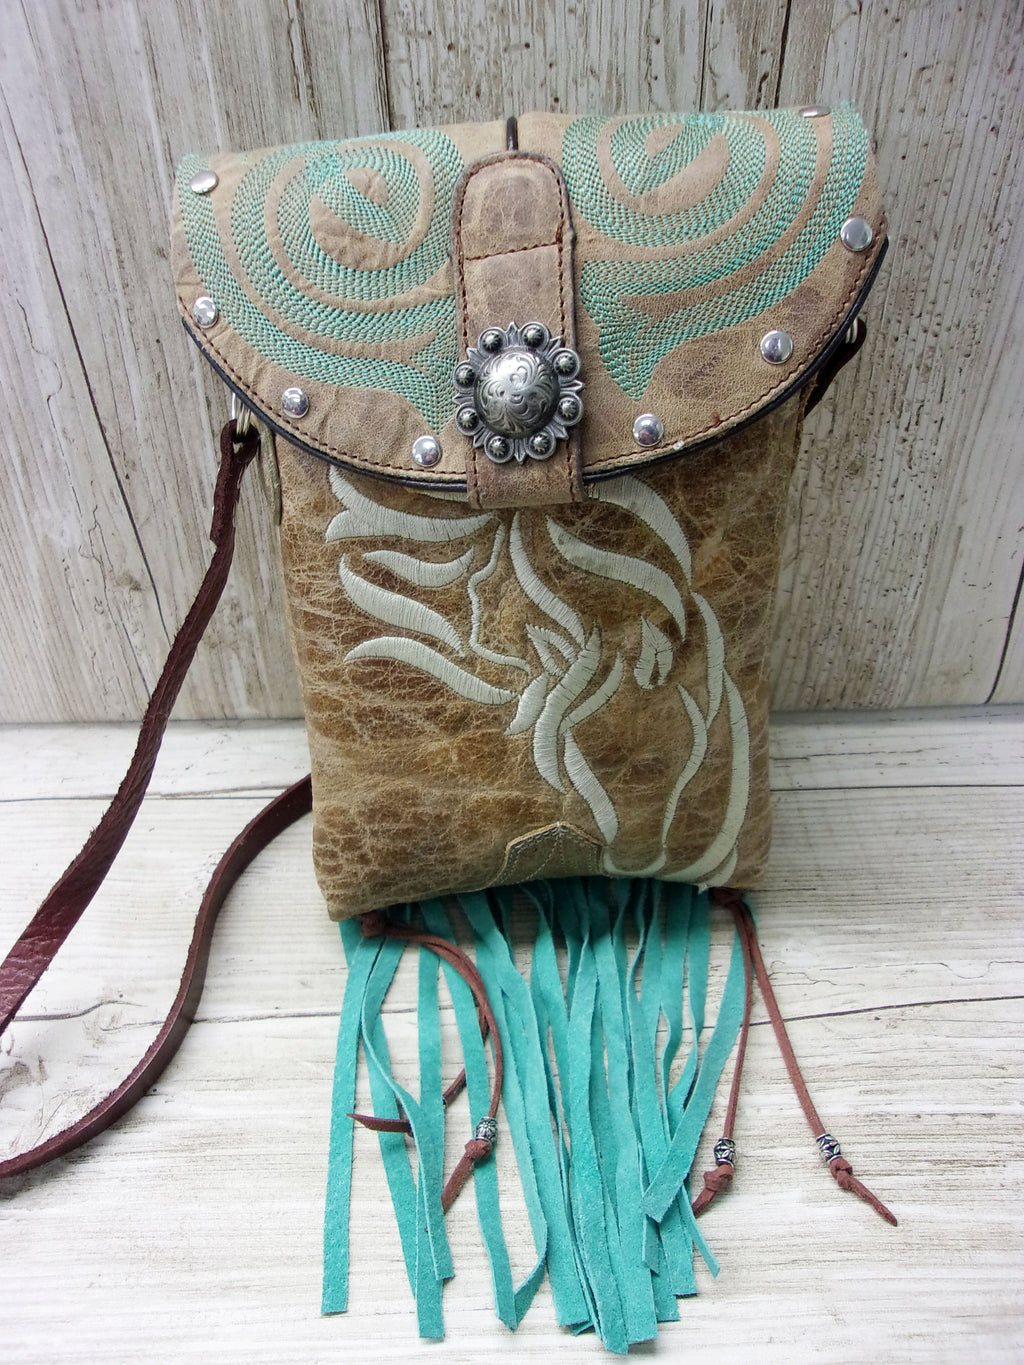 Small Western Purse -Purse with Fringe - Cowboy Boot Purse - Small Crossbody Bag sm231 Chris Thompson Bags